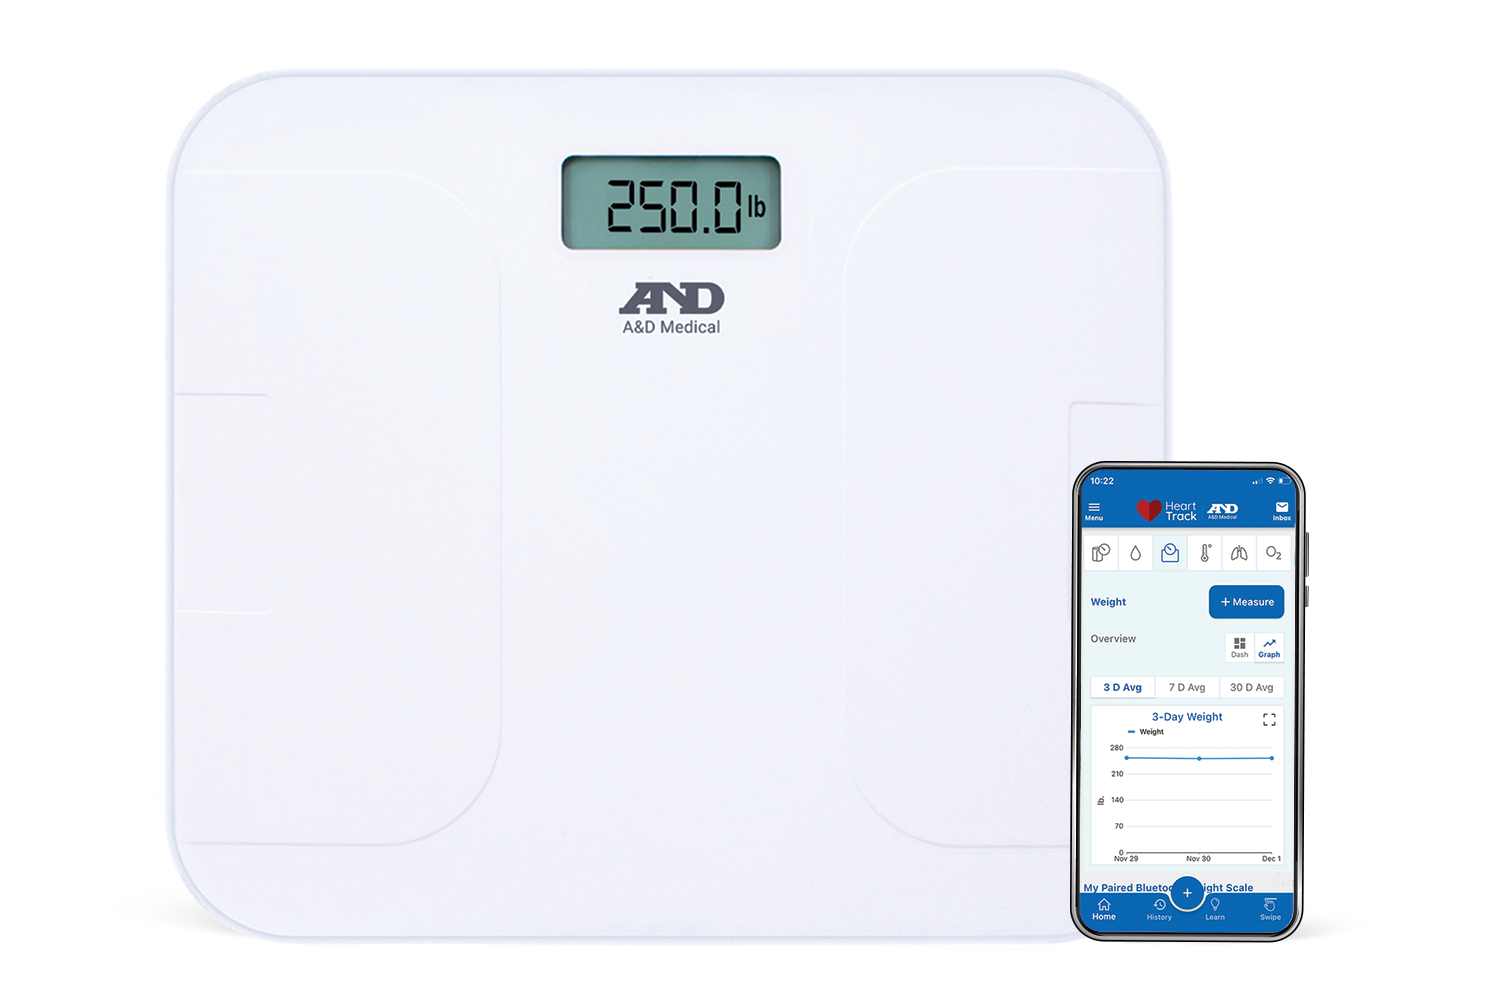 A&D Medical Lifesource UC-324 ANT+ enabled Weight Scale Review